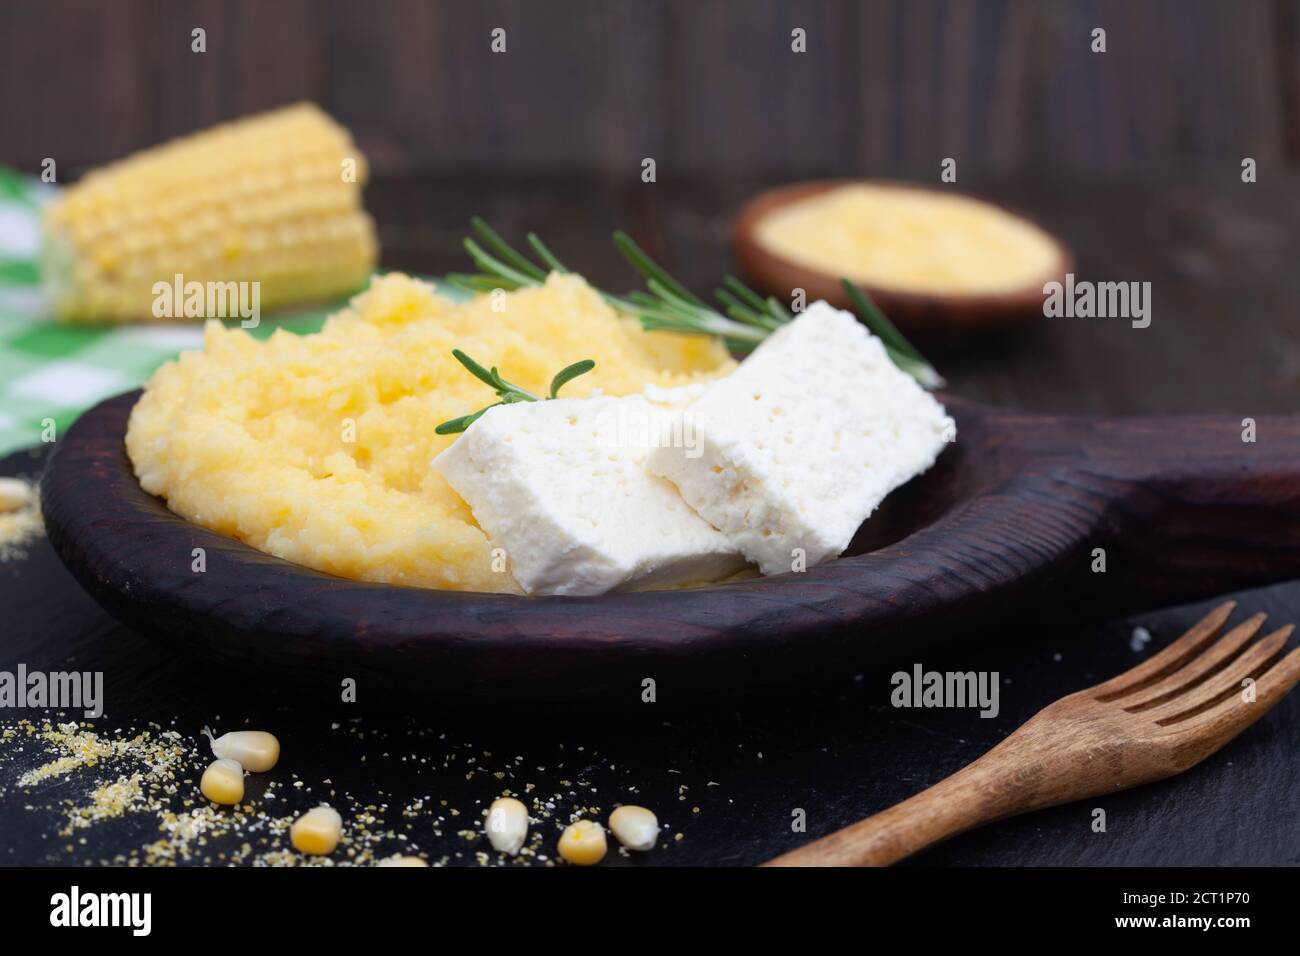 Mamaliga or polenta porridge made out of yellow maize flour. Homemade palenta with cheese, traditional meal on Balkan. Stock Photo